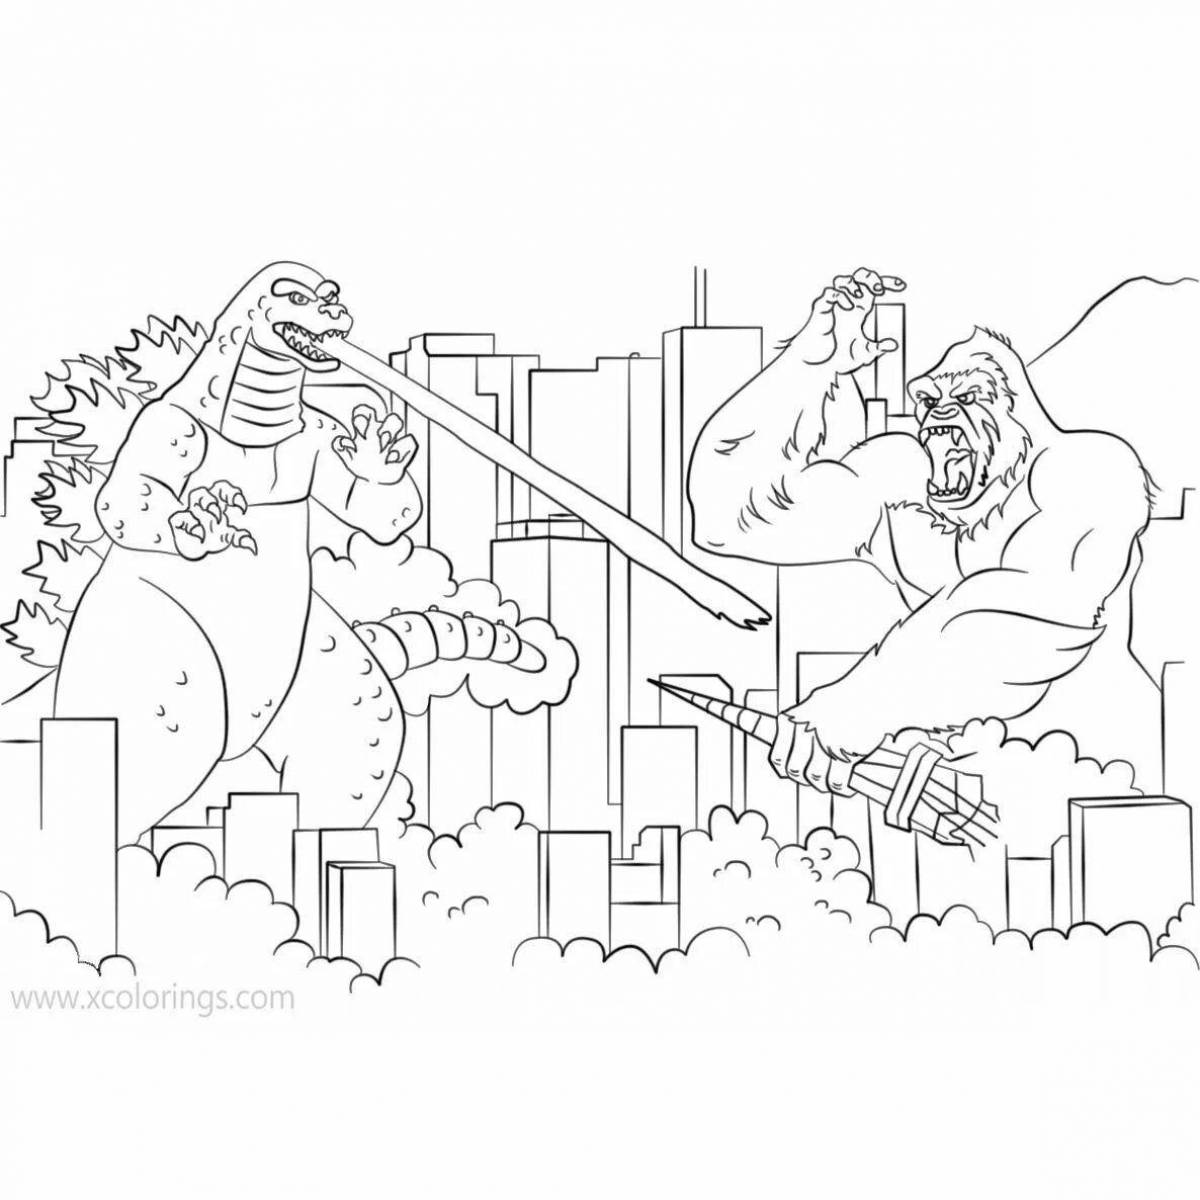 Godzilla vs Kong coloring page in colorful colors